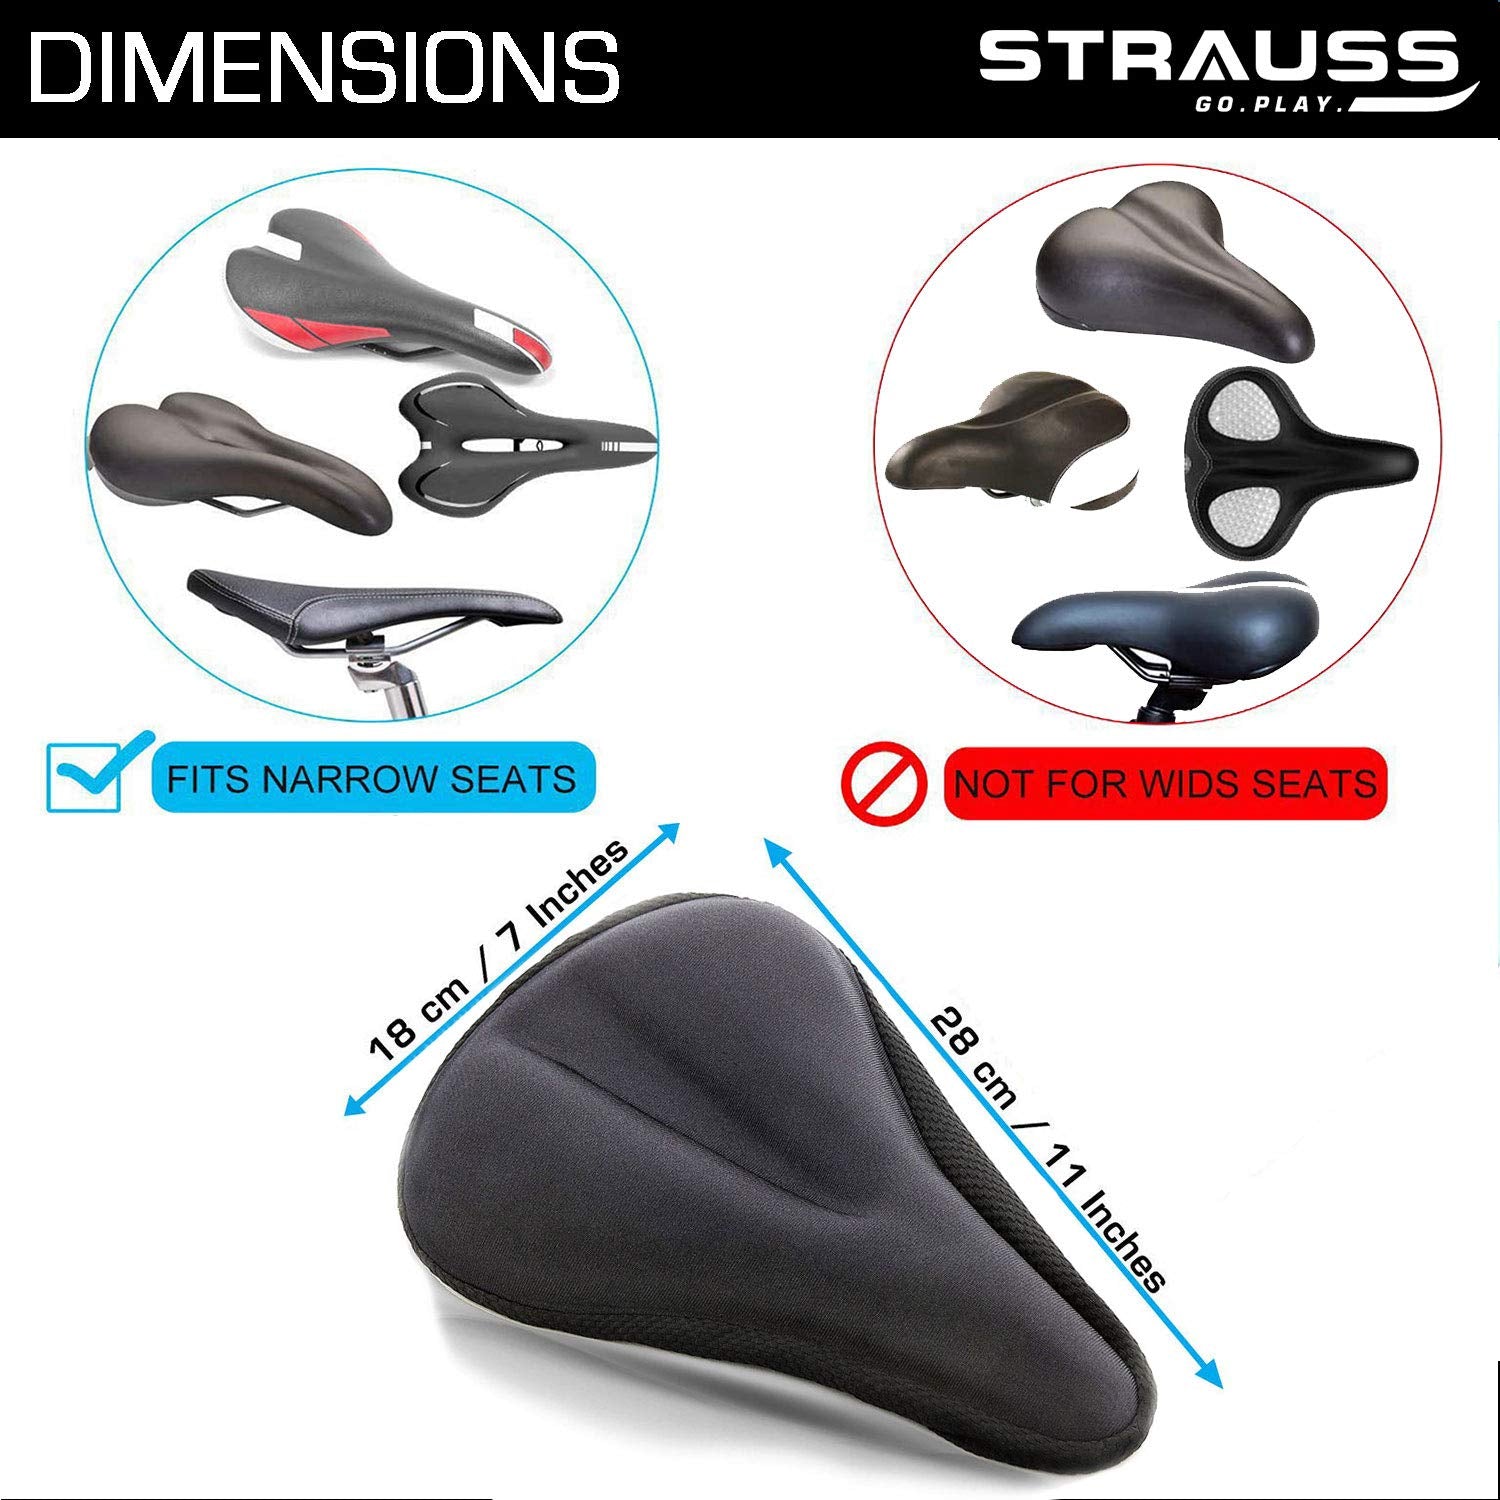 Strauss Bicycle Saddle Seat Cover, (Black), Sporty Cycling/Gym Gloves, Large, (Black/Red)